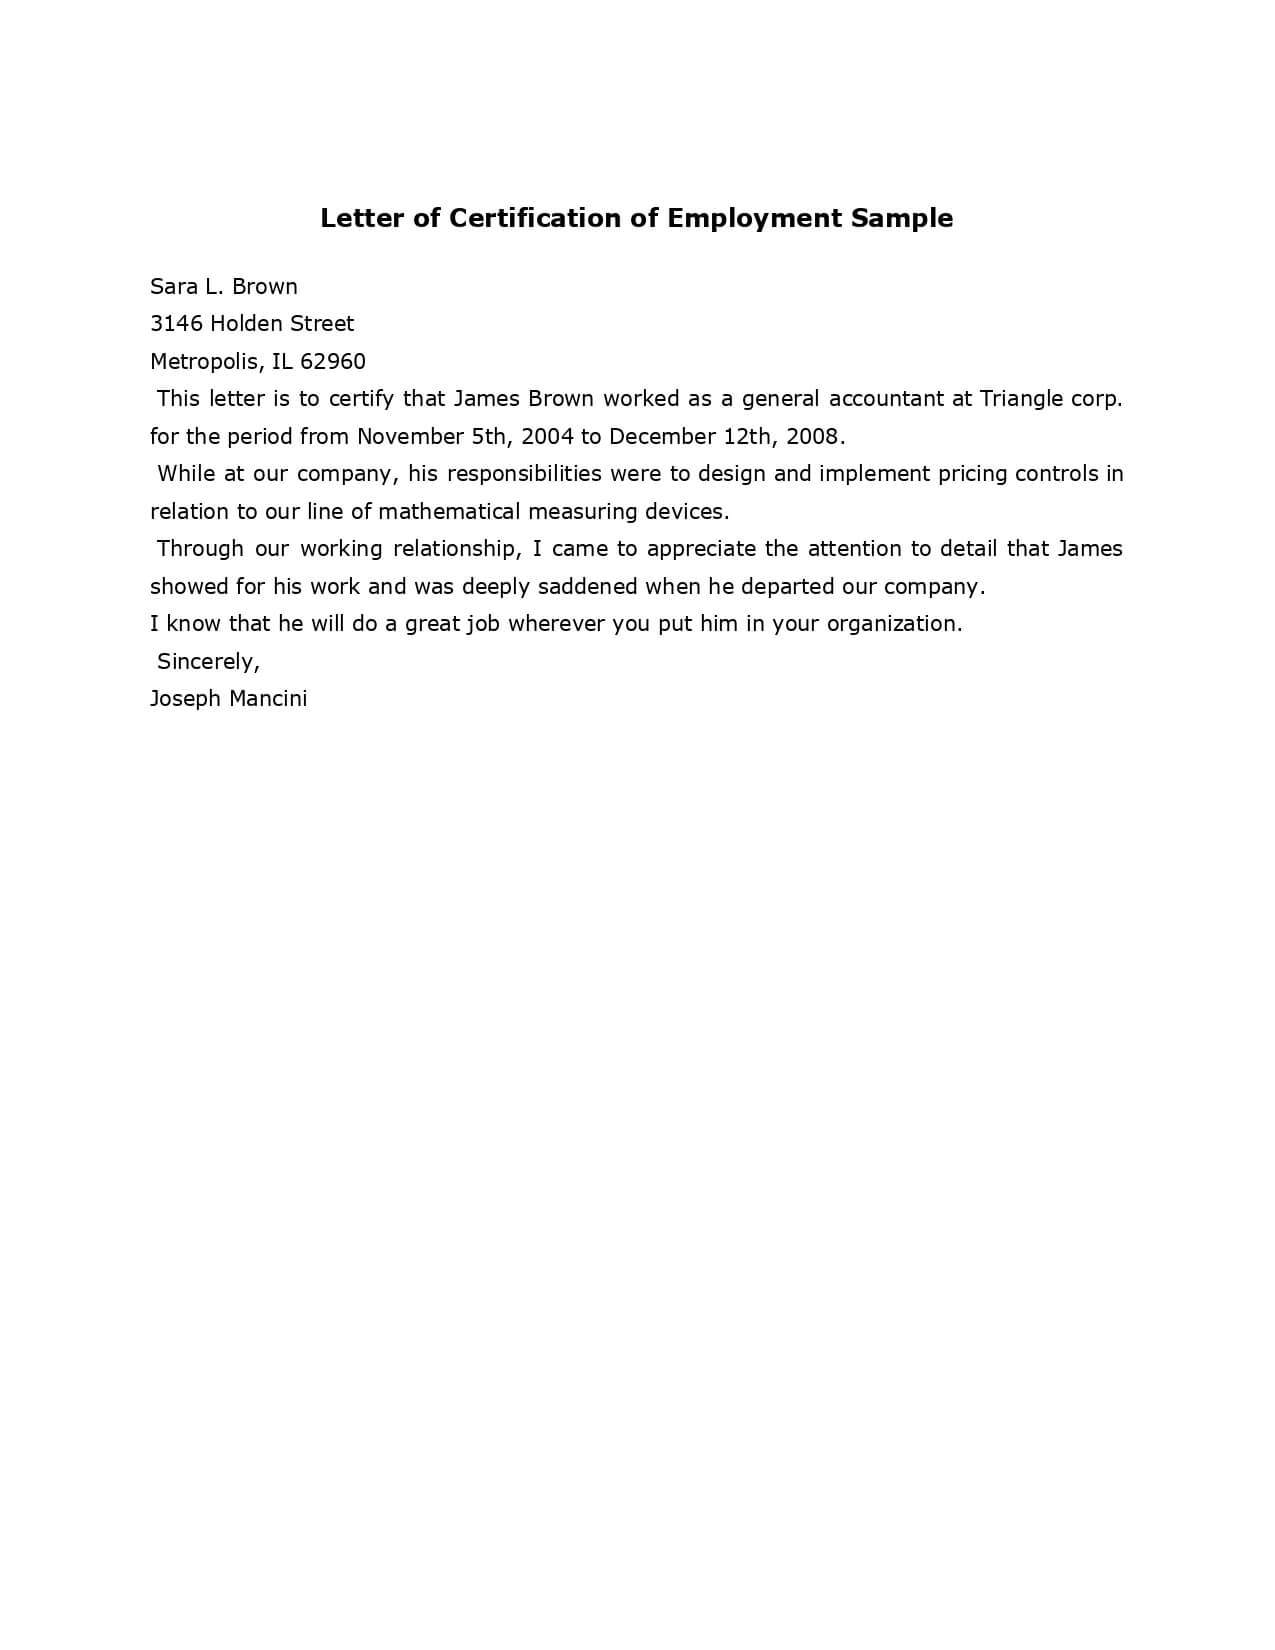 Sample Employment Certificate From Employer – Google Docs For Certificate Of Employment Template